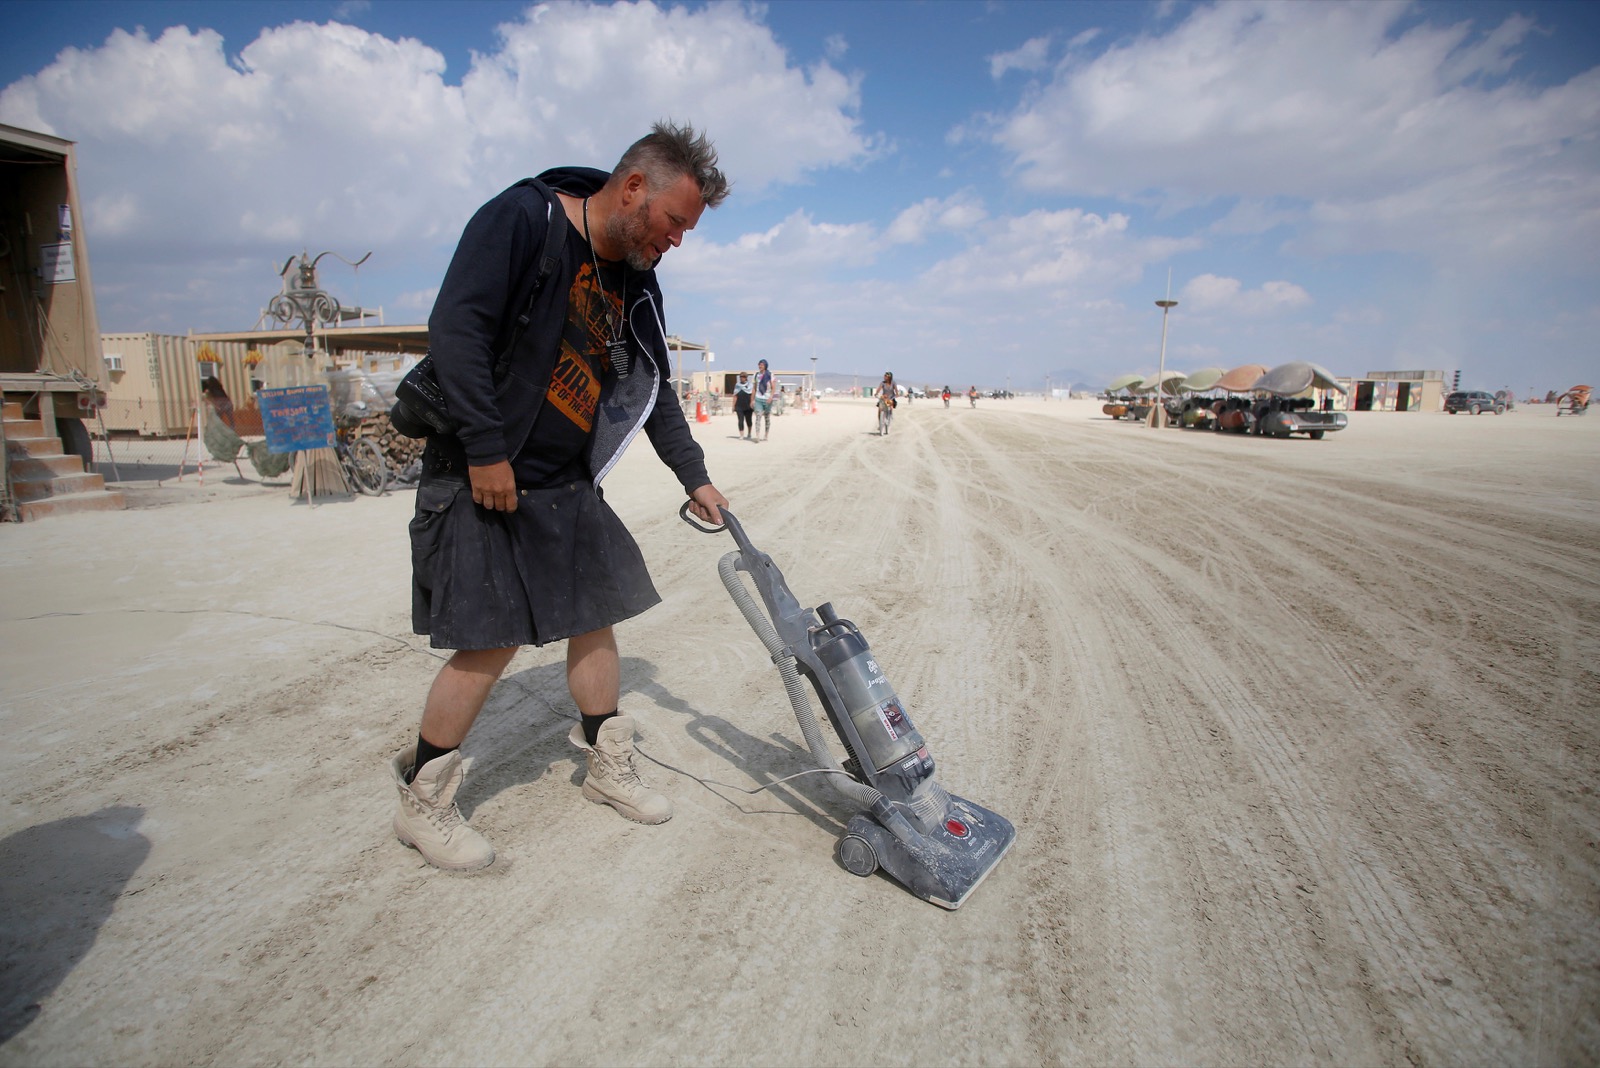 Huybert Van De Stadt vacuums the Playa as approximately 70,000 people from all over the world gathered for the 30th annual Burning Man arts and music festival in the Black Rock Desert of Nevada, U.S. September 4, 2016. REUTERS/Jim Urquhart FOR USE WITH BURNING MAN RELATED REPORTING ONLY. FOR EDITORIAL USE ONLY. NOT FOR SALE FOR MARKETING OR ADVERTISING CAMPAIGNS. NO THIRD PARTY SALES. NOT FOR USE BY REUTERS THIRD PARTY DISTRIBUTORS